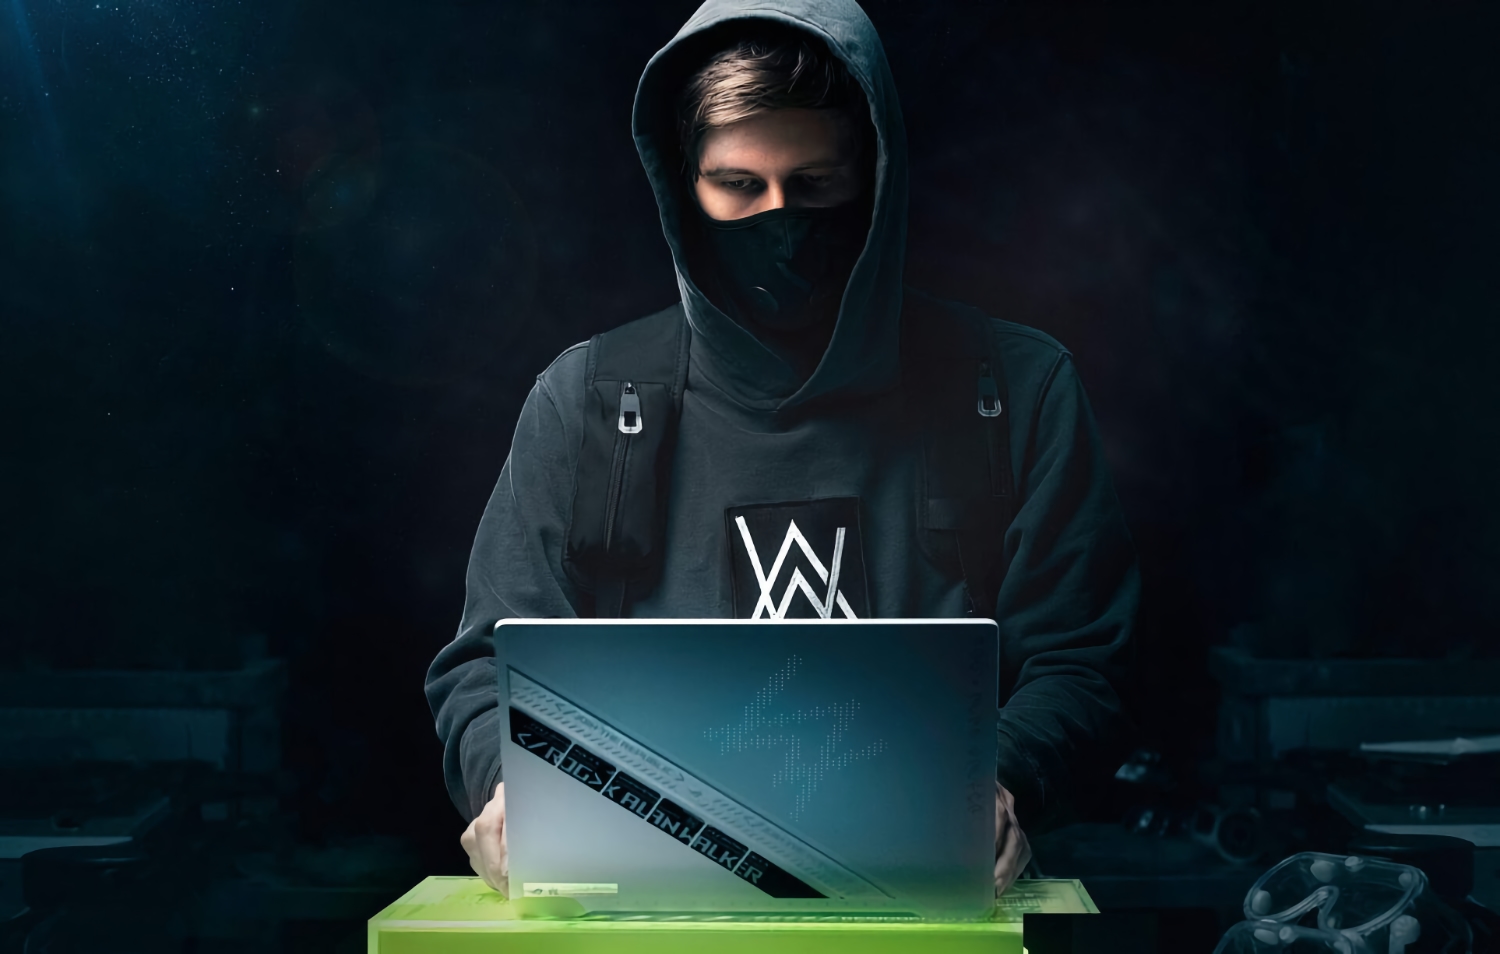 ASUS ROG Zephyrus G14 Alan Walker SE: A gaming laptop co-designed with the DJ who wrote the soundtracks for PUBG Mobile and Death Stranding